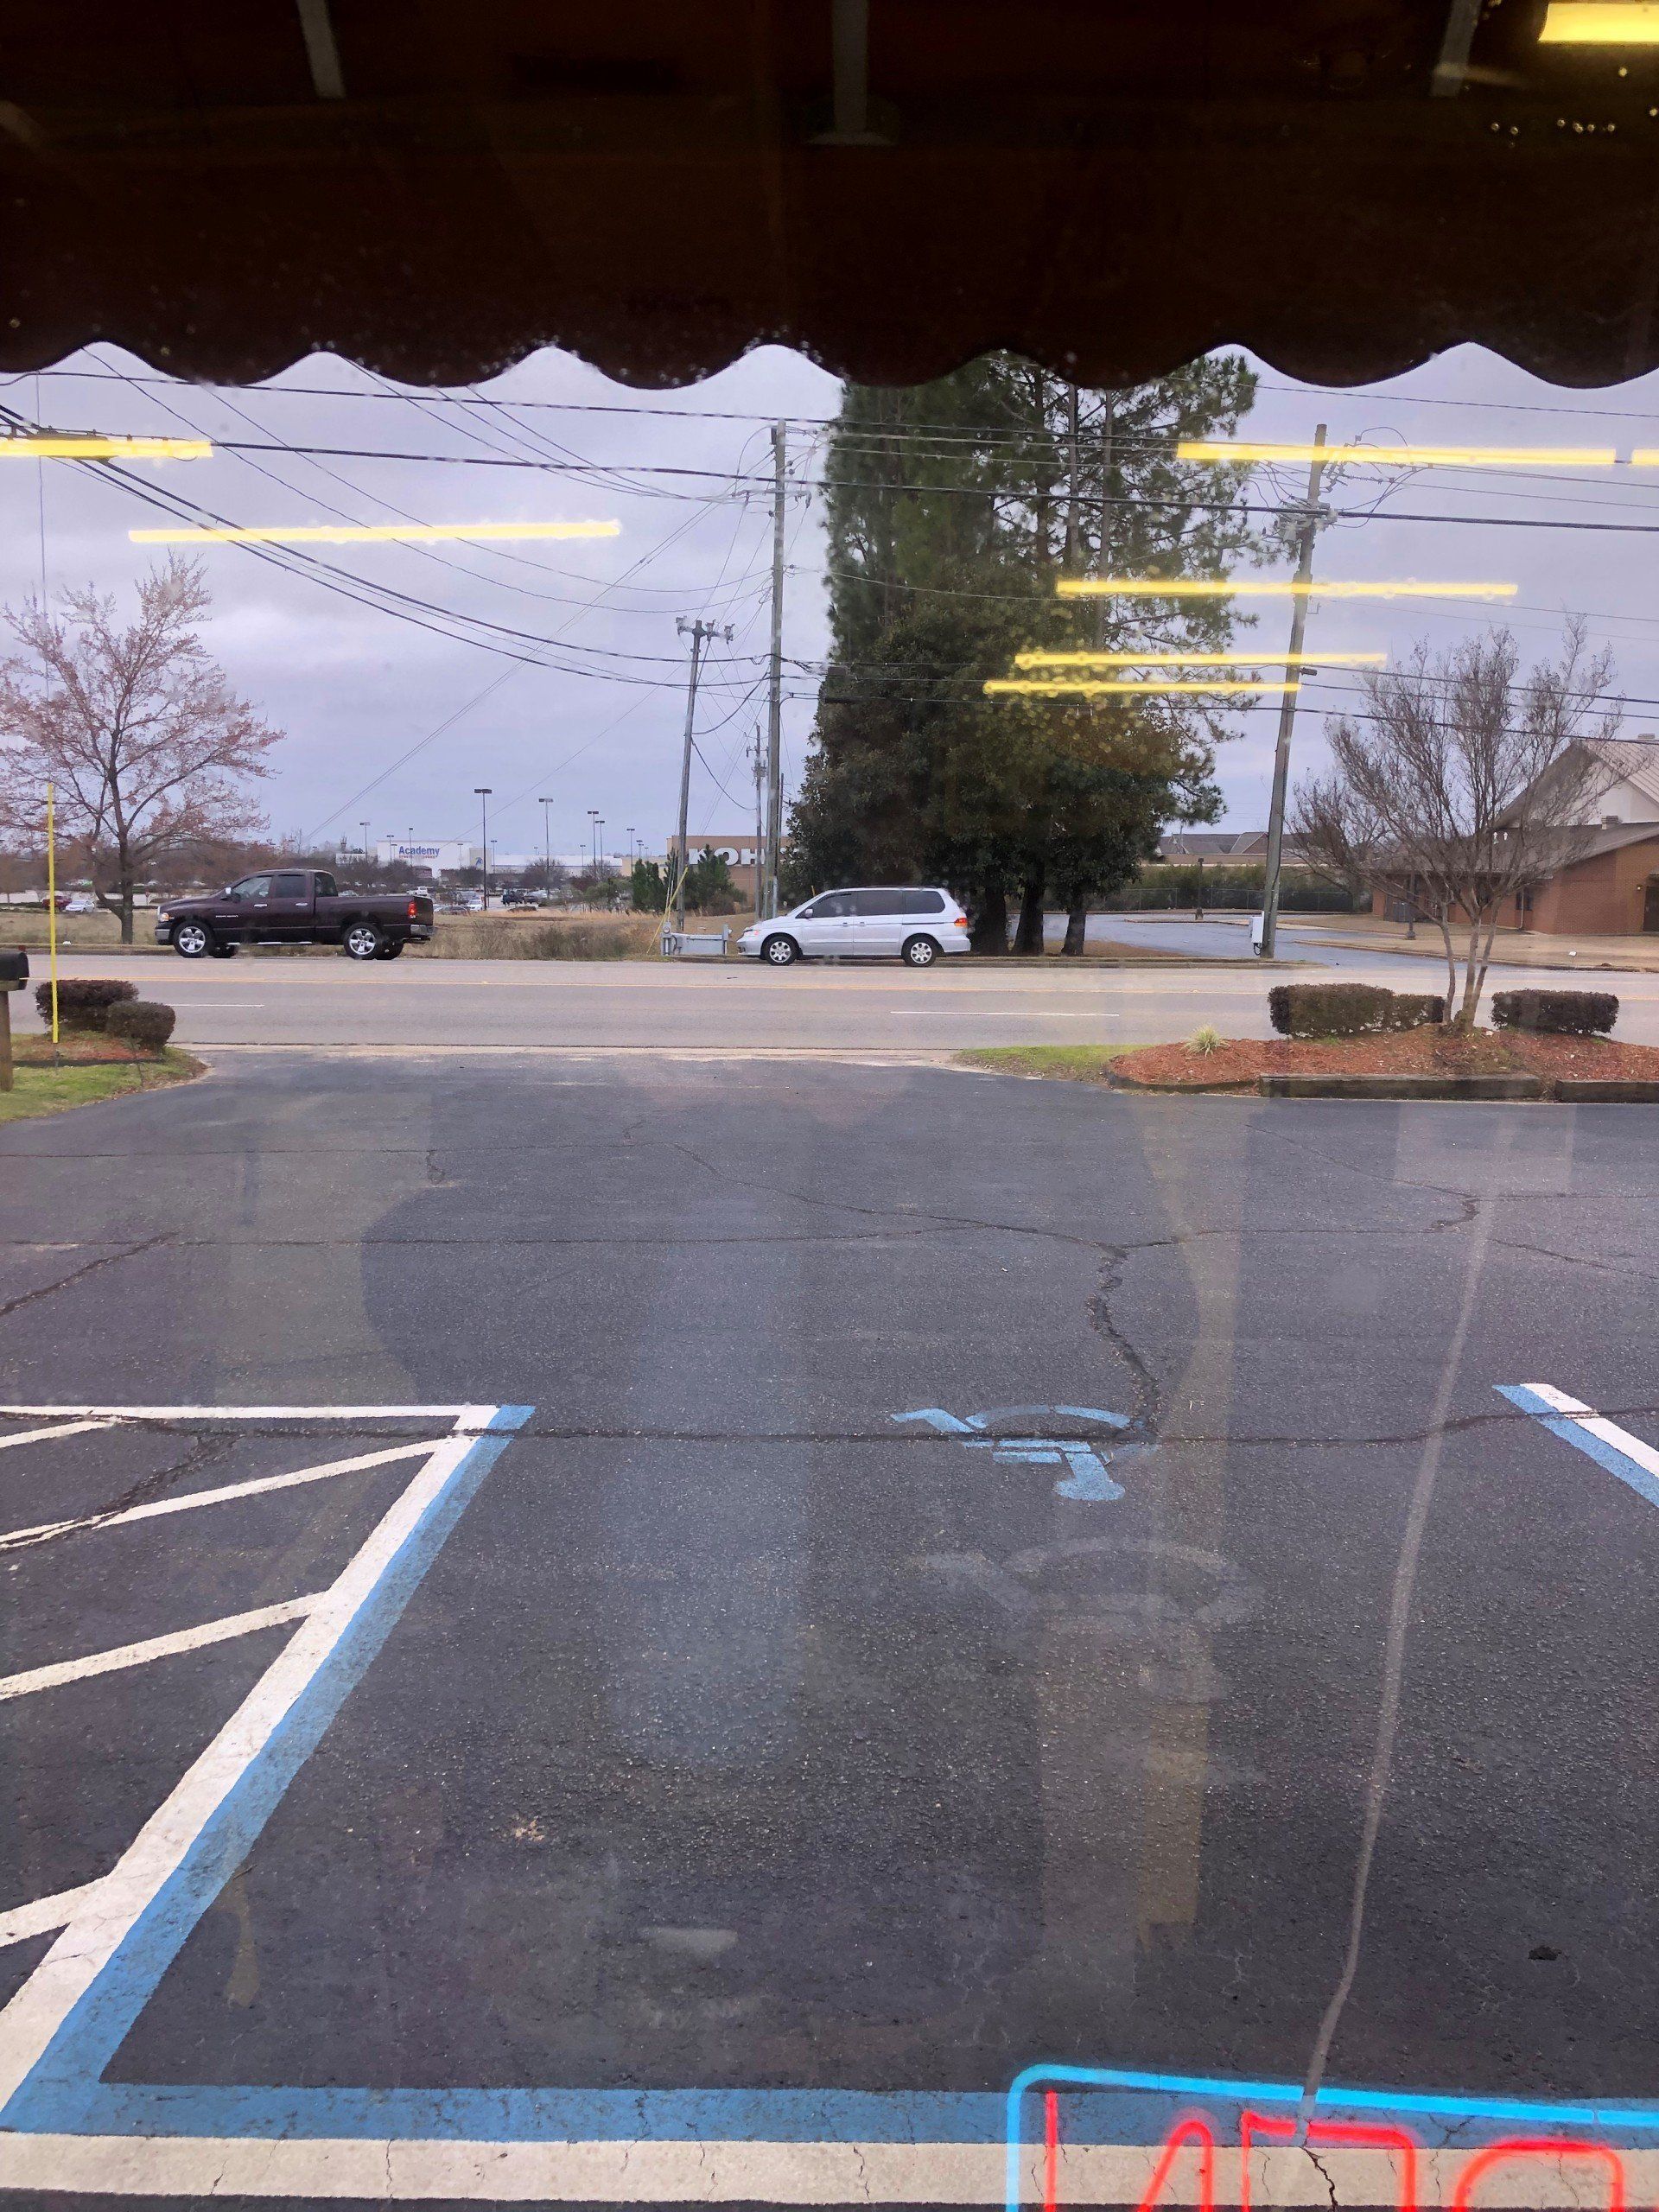 Store tint installation in Prattville AL on 1.14.2019 - before generic tint removal looking out foggy business windows